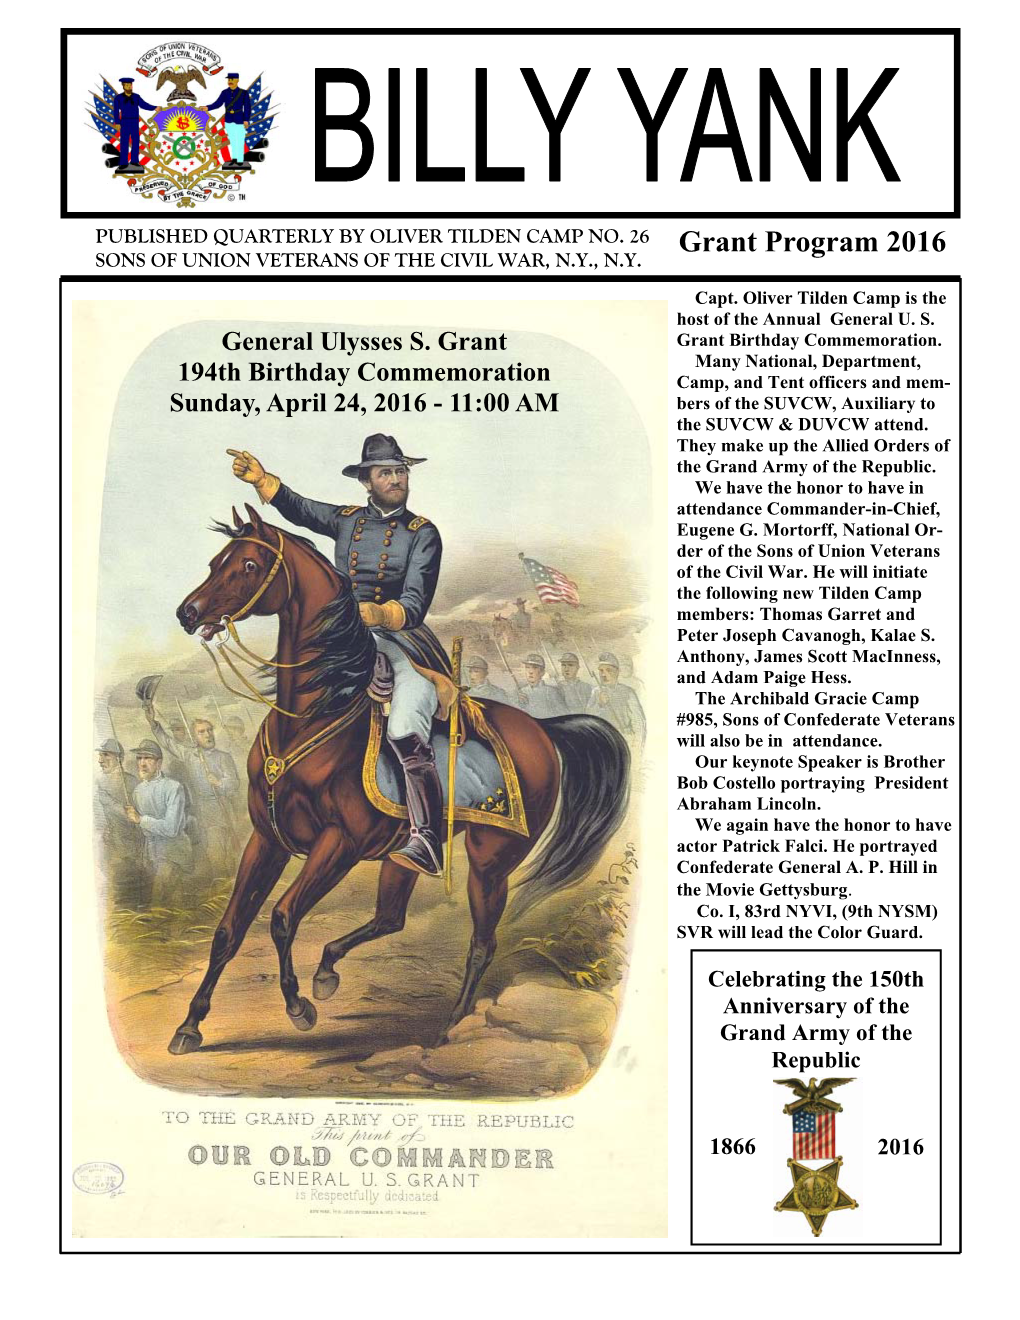 Billy Yank” the Official Publication of Captain Oliver Tilden Camp #26, SUVCW